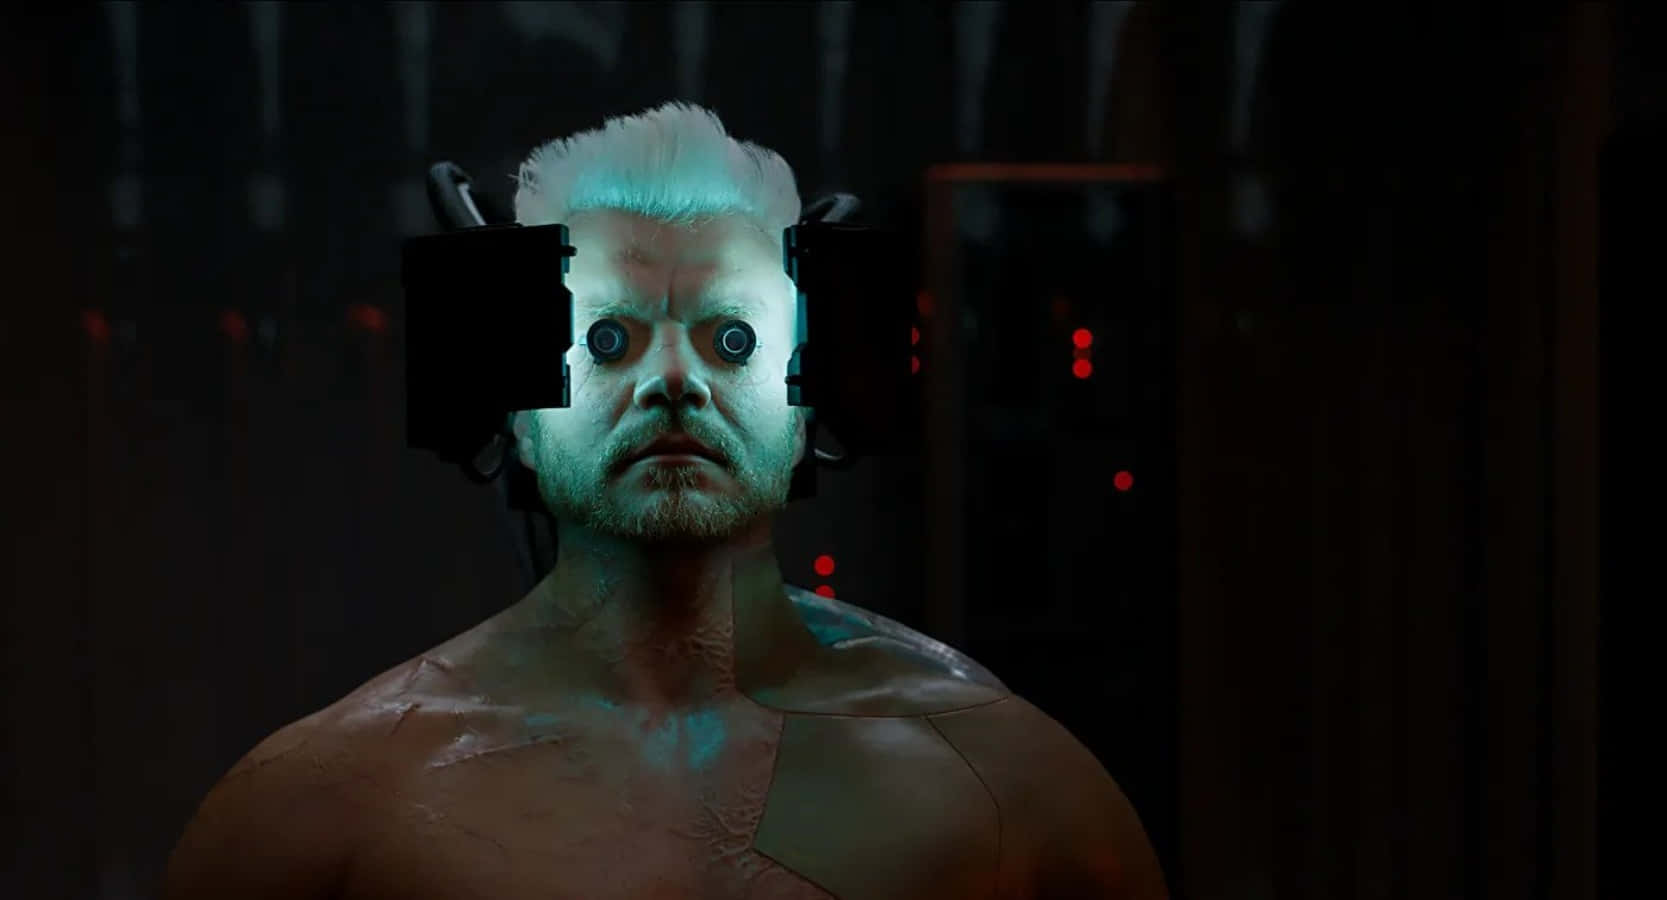 Ghost in the Shell's Batou Preparing for Action Wallpaper